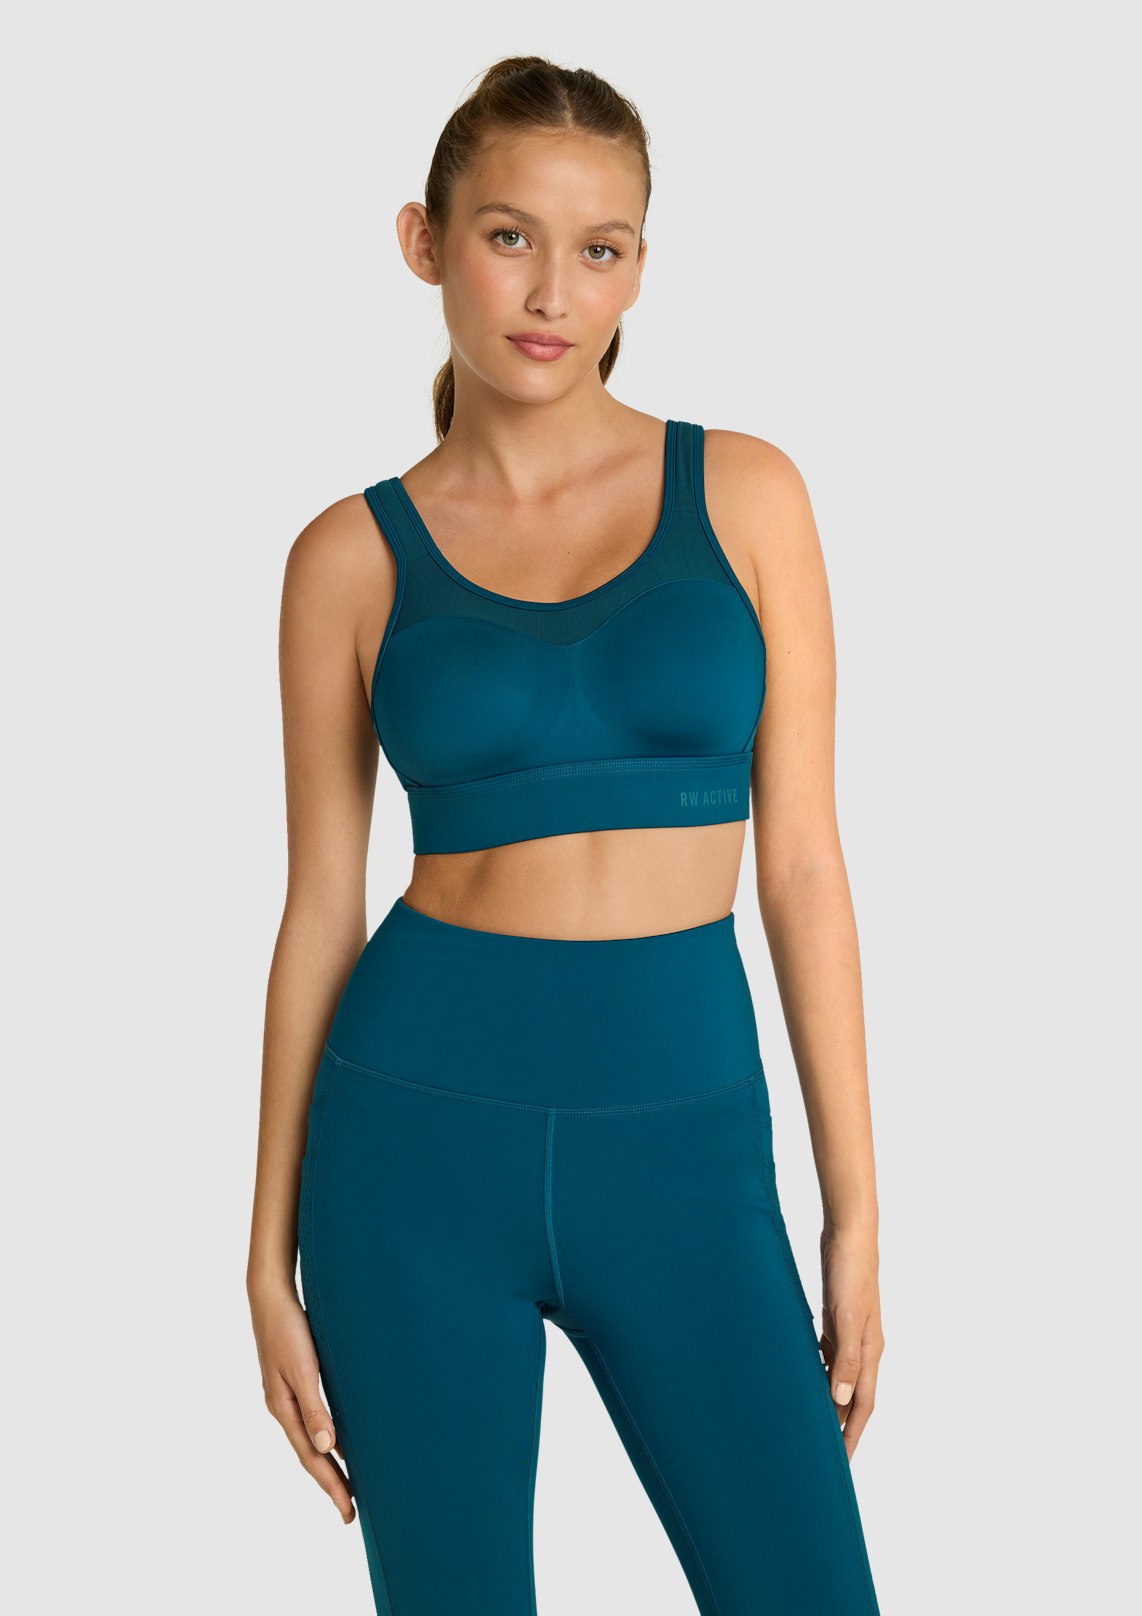 Rockwear - Get ready to feel supported ⭐️ Featuring luxe gold detailing  this high impact sports bra was made for you! Perfect for ✨ Running ✨ HIIT  Sessions ✨ Everything! www.rockwear.com.au #rockwear #